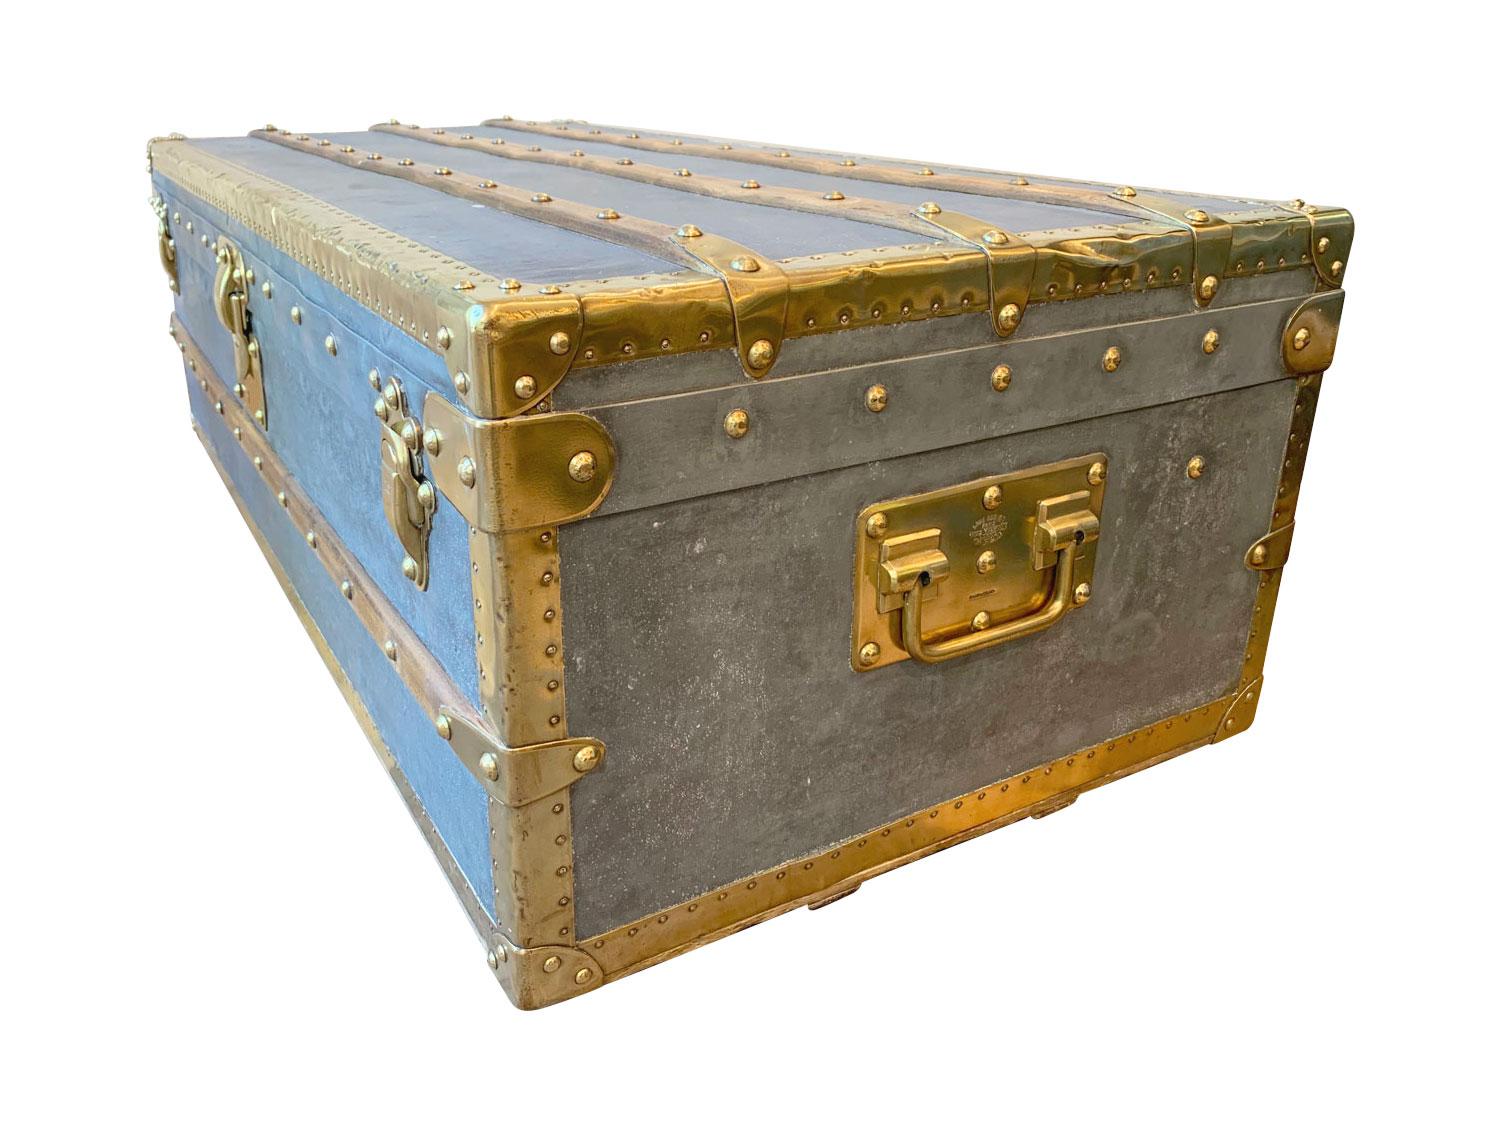 Hermetically sealed zinc Louis Vuitton Cabin Trunk, circa 1885. This extremely rare and highly sought-after all-zinc covered small Malle Cabine (Cabin Trunk) with an all brass trim, LV brass studs, copper pins, brass side handles and locks, with two